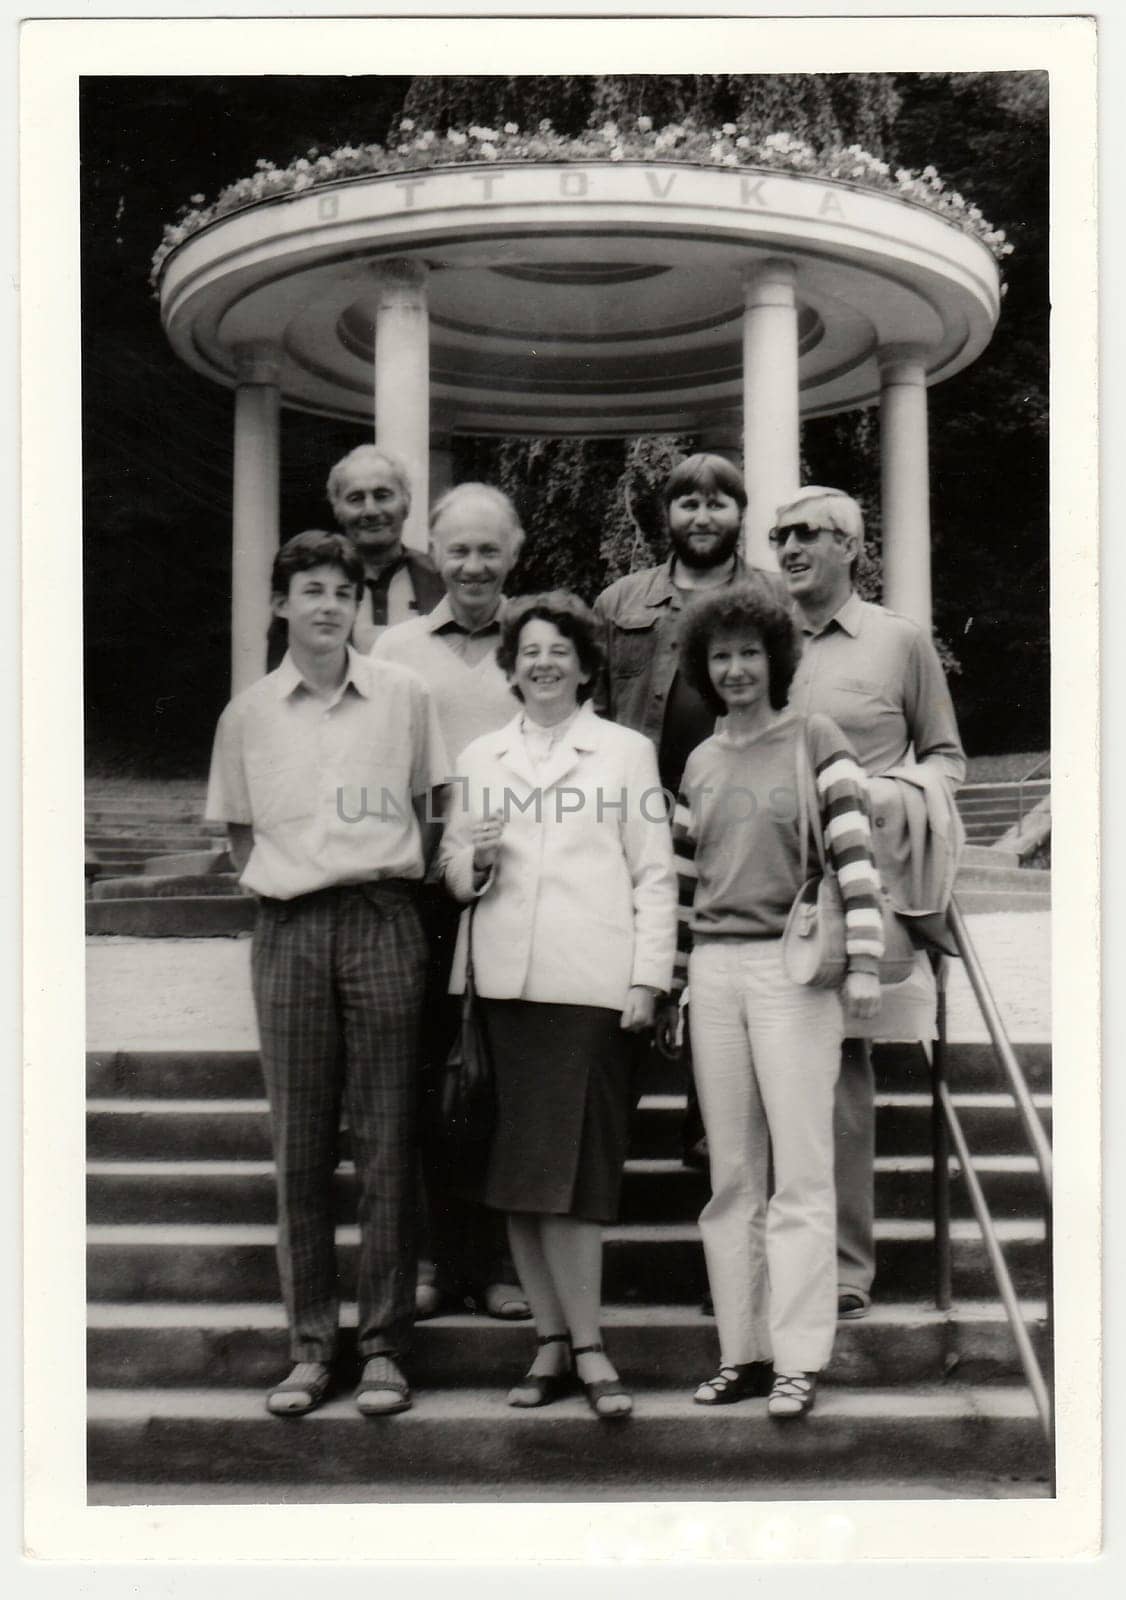 THE CZECHOSLOVAK SOCIALIST REPUBLIC - CIRCA 1980s: Vintage photo shows group of people at spa resort.